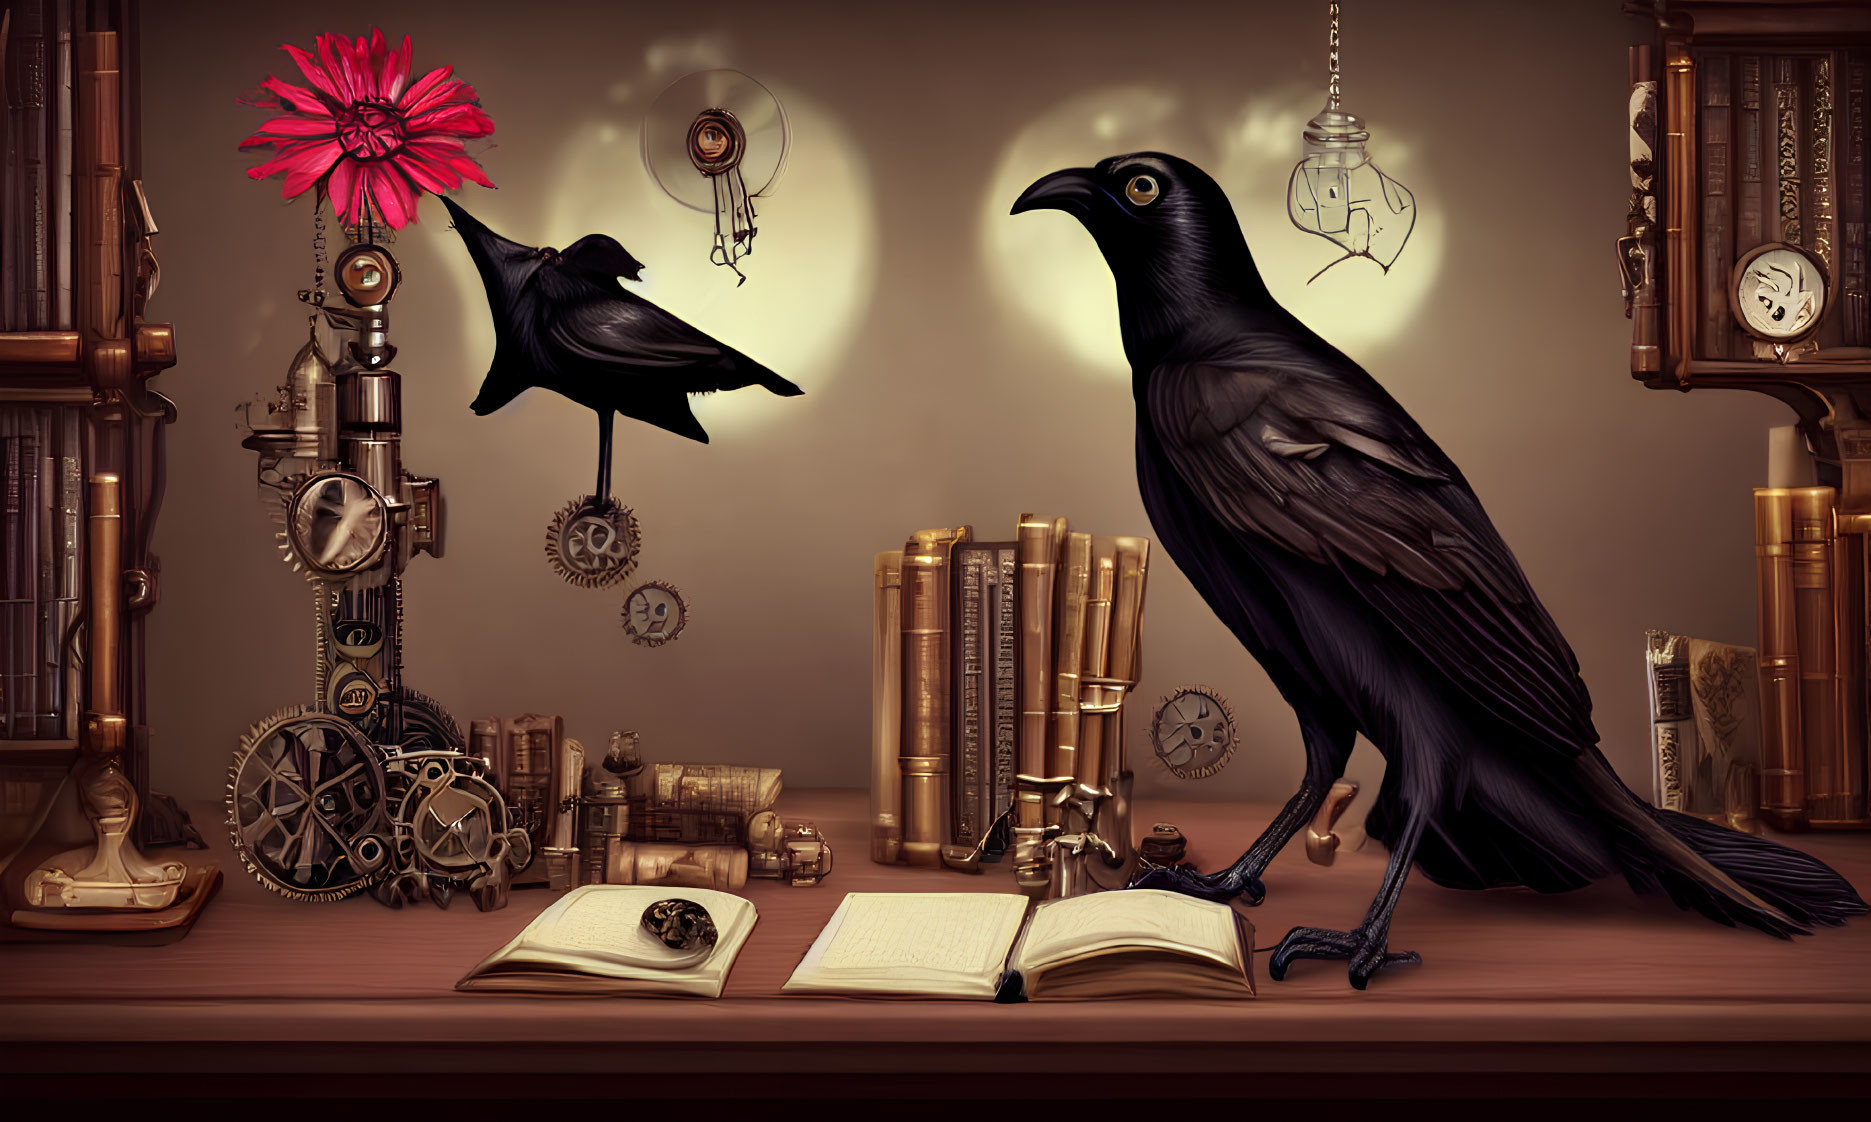 Raven with red flower, book, clocks, and steampunk gears on desk